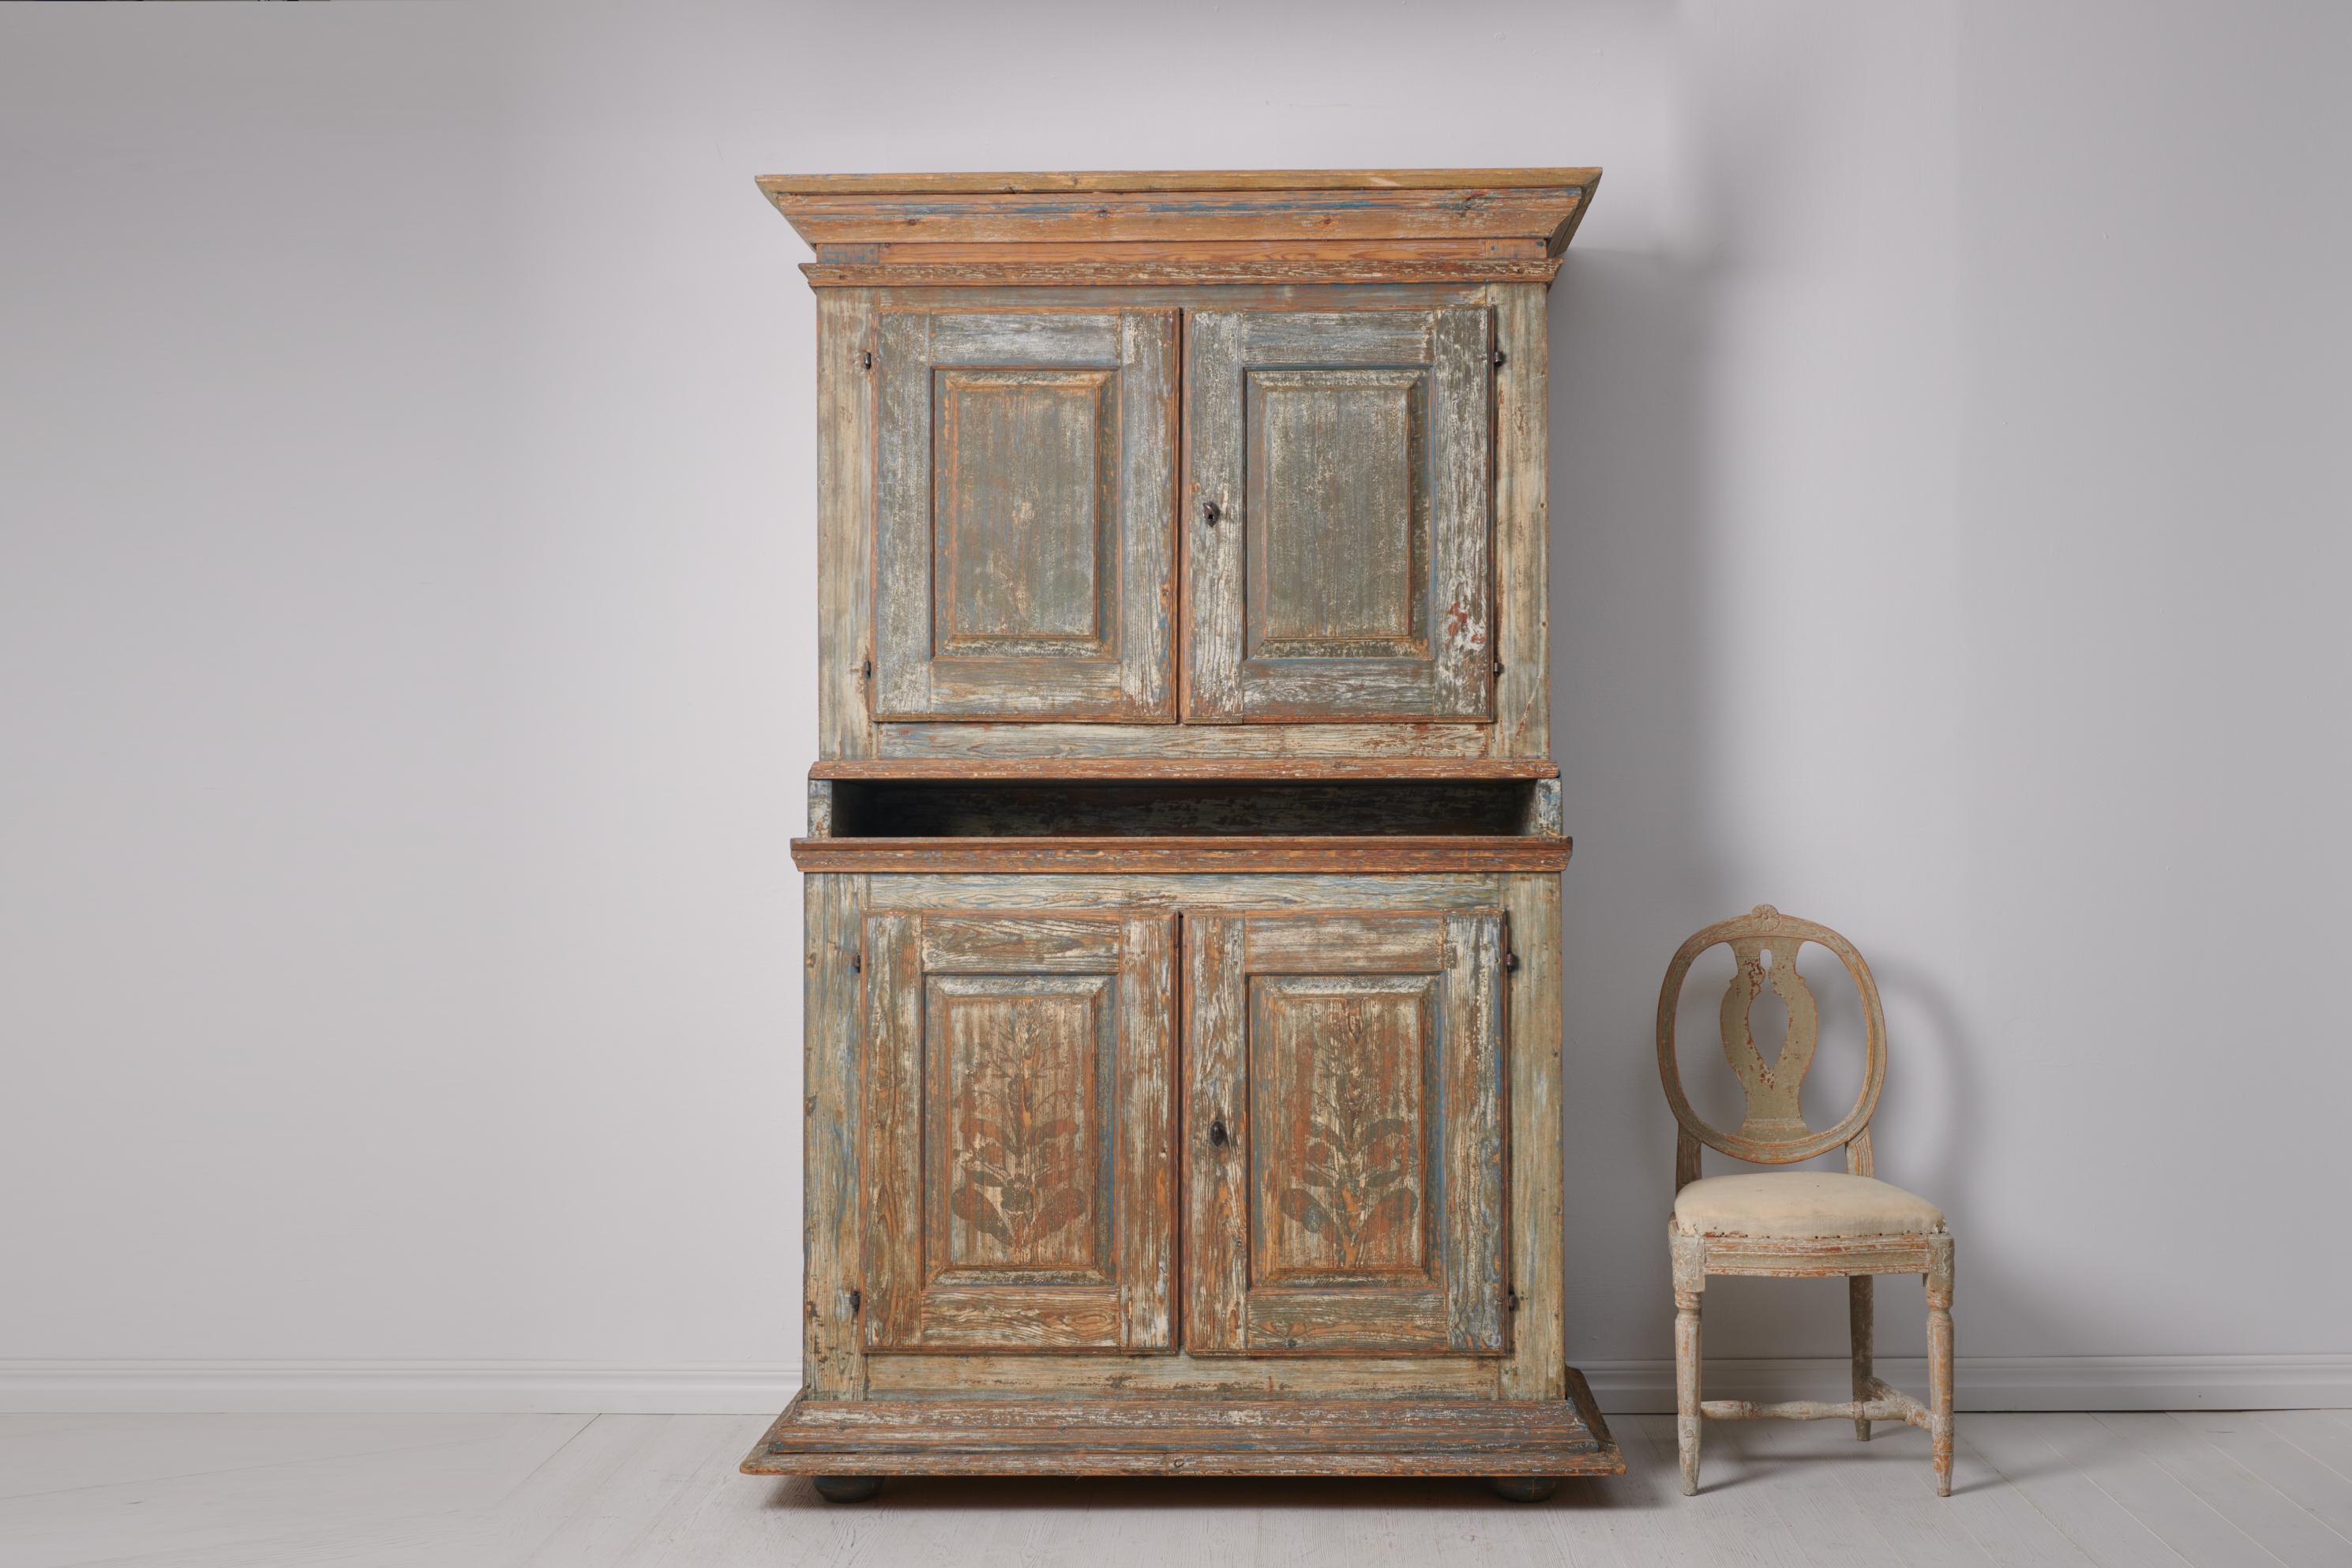 Antique Swedish baroque cabinet. The cabinet is a genuine Swedish country house furniture from the late 1700s. It is a proper statement piece made by hand in solid pine. The cabinet is painted and has the original paint which has become worn and